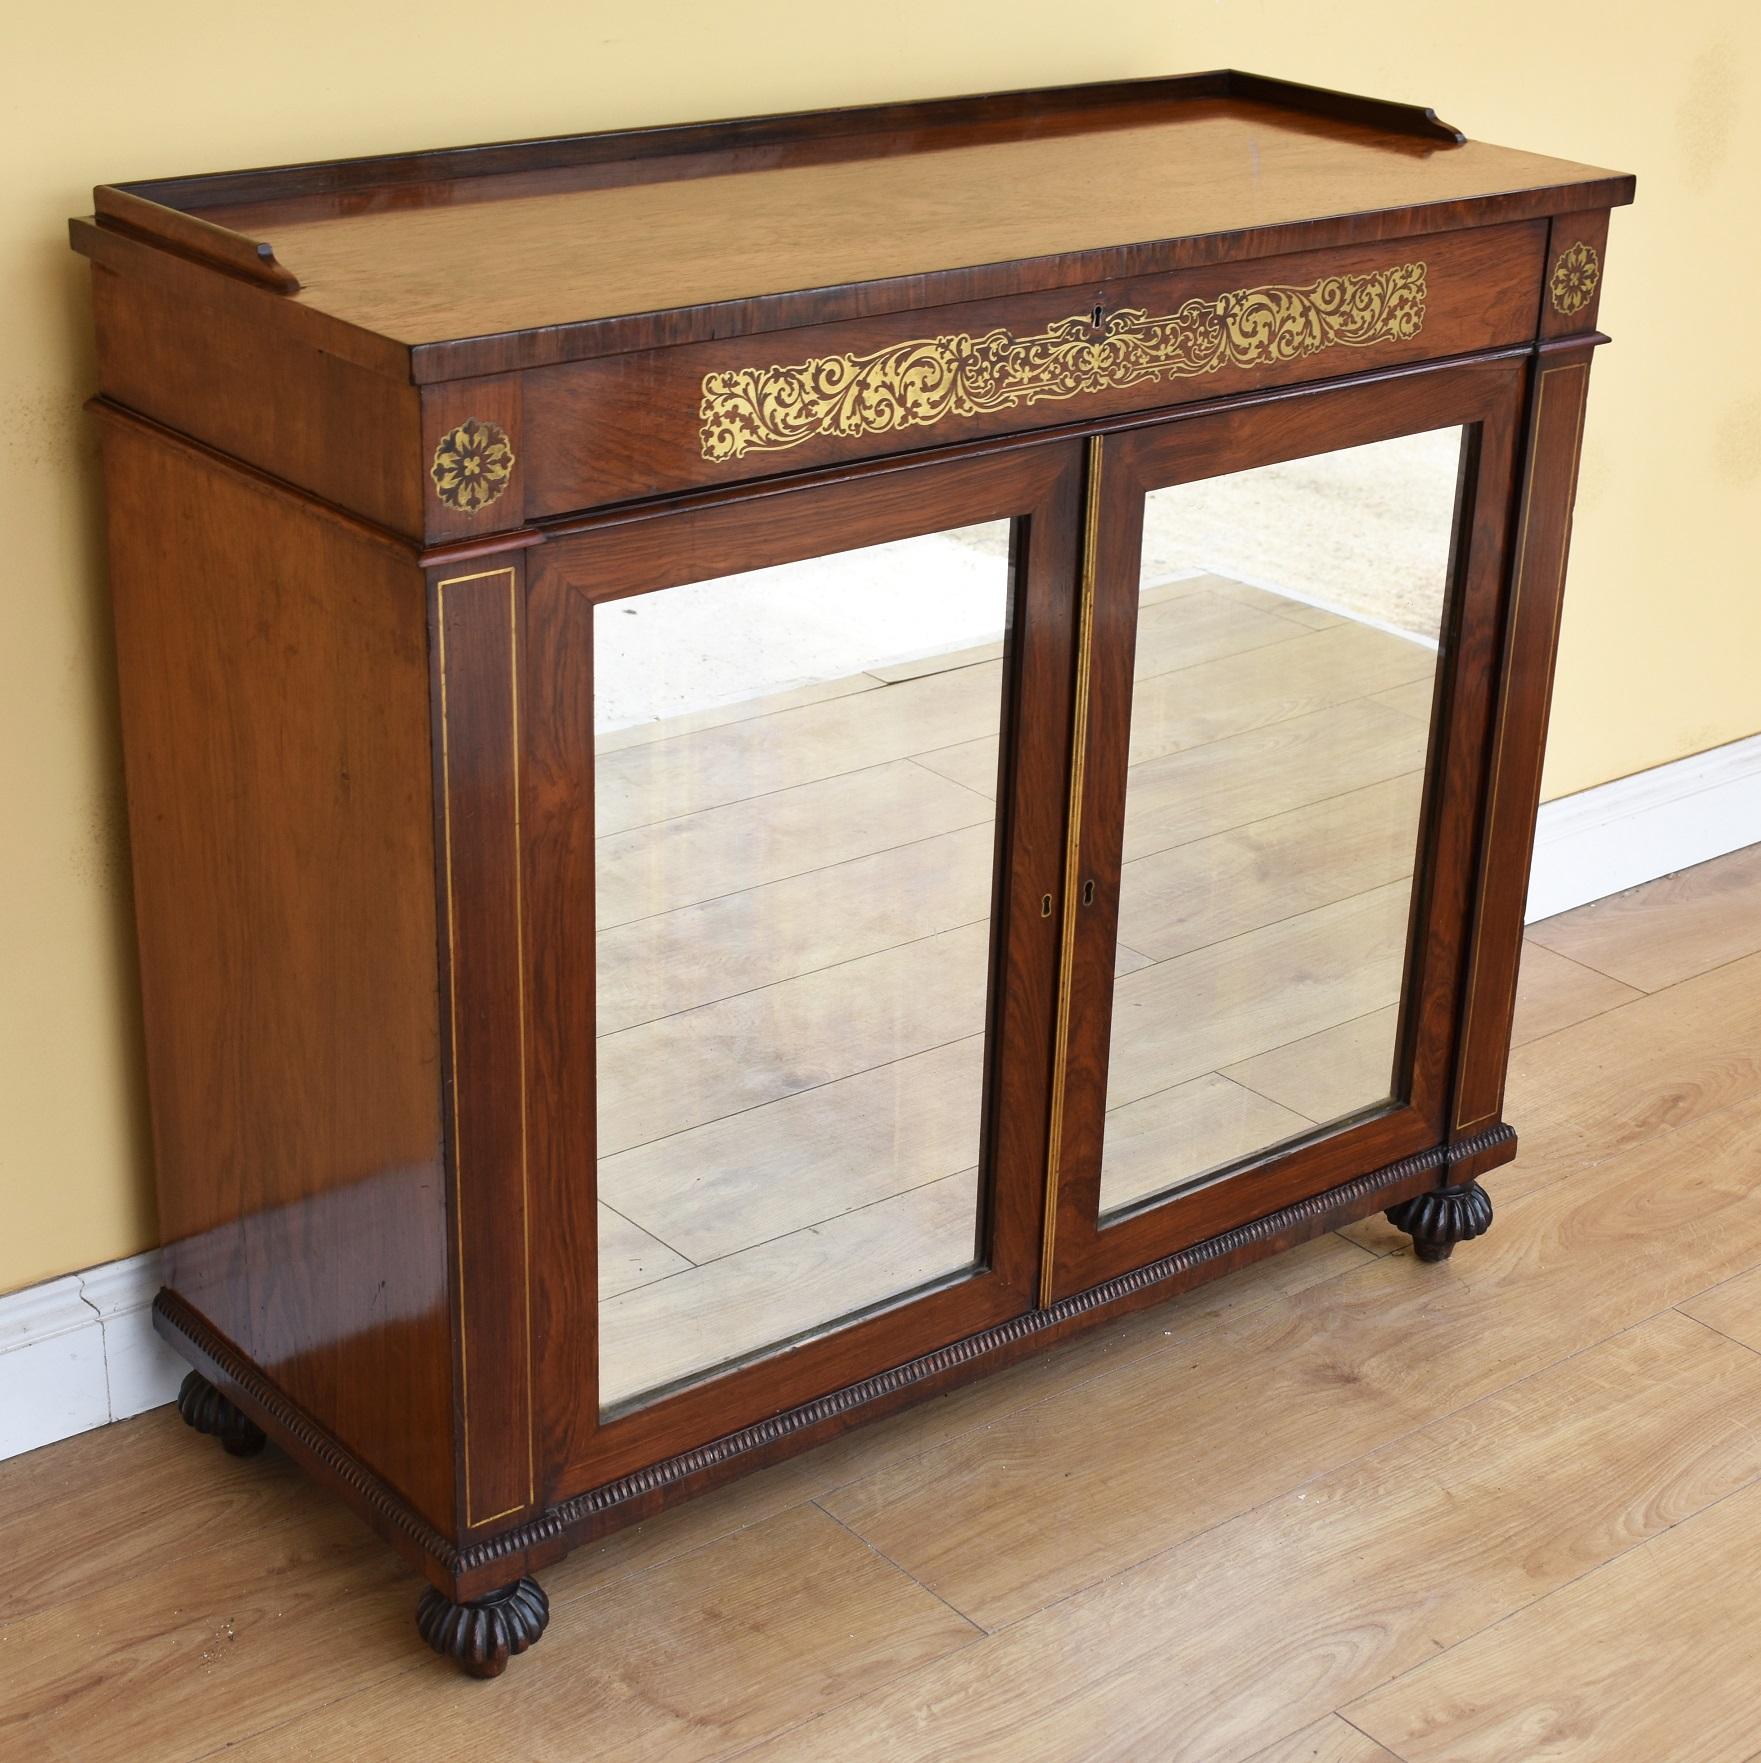 For sale is a good quality 19th century Regency rosewood and brass inlaid side cabinet, having a galleried top above a single drawer, decorated with ornate brass inlay, over two cupboards, each having mirrored panels, opening to reveal a single